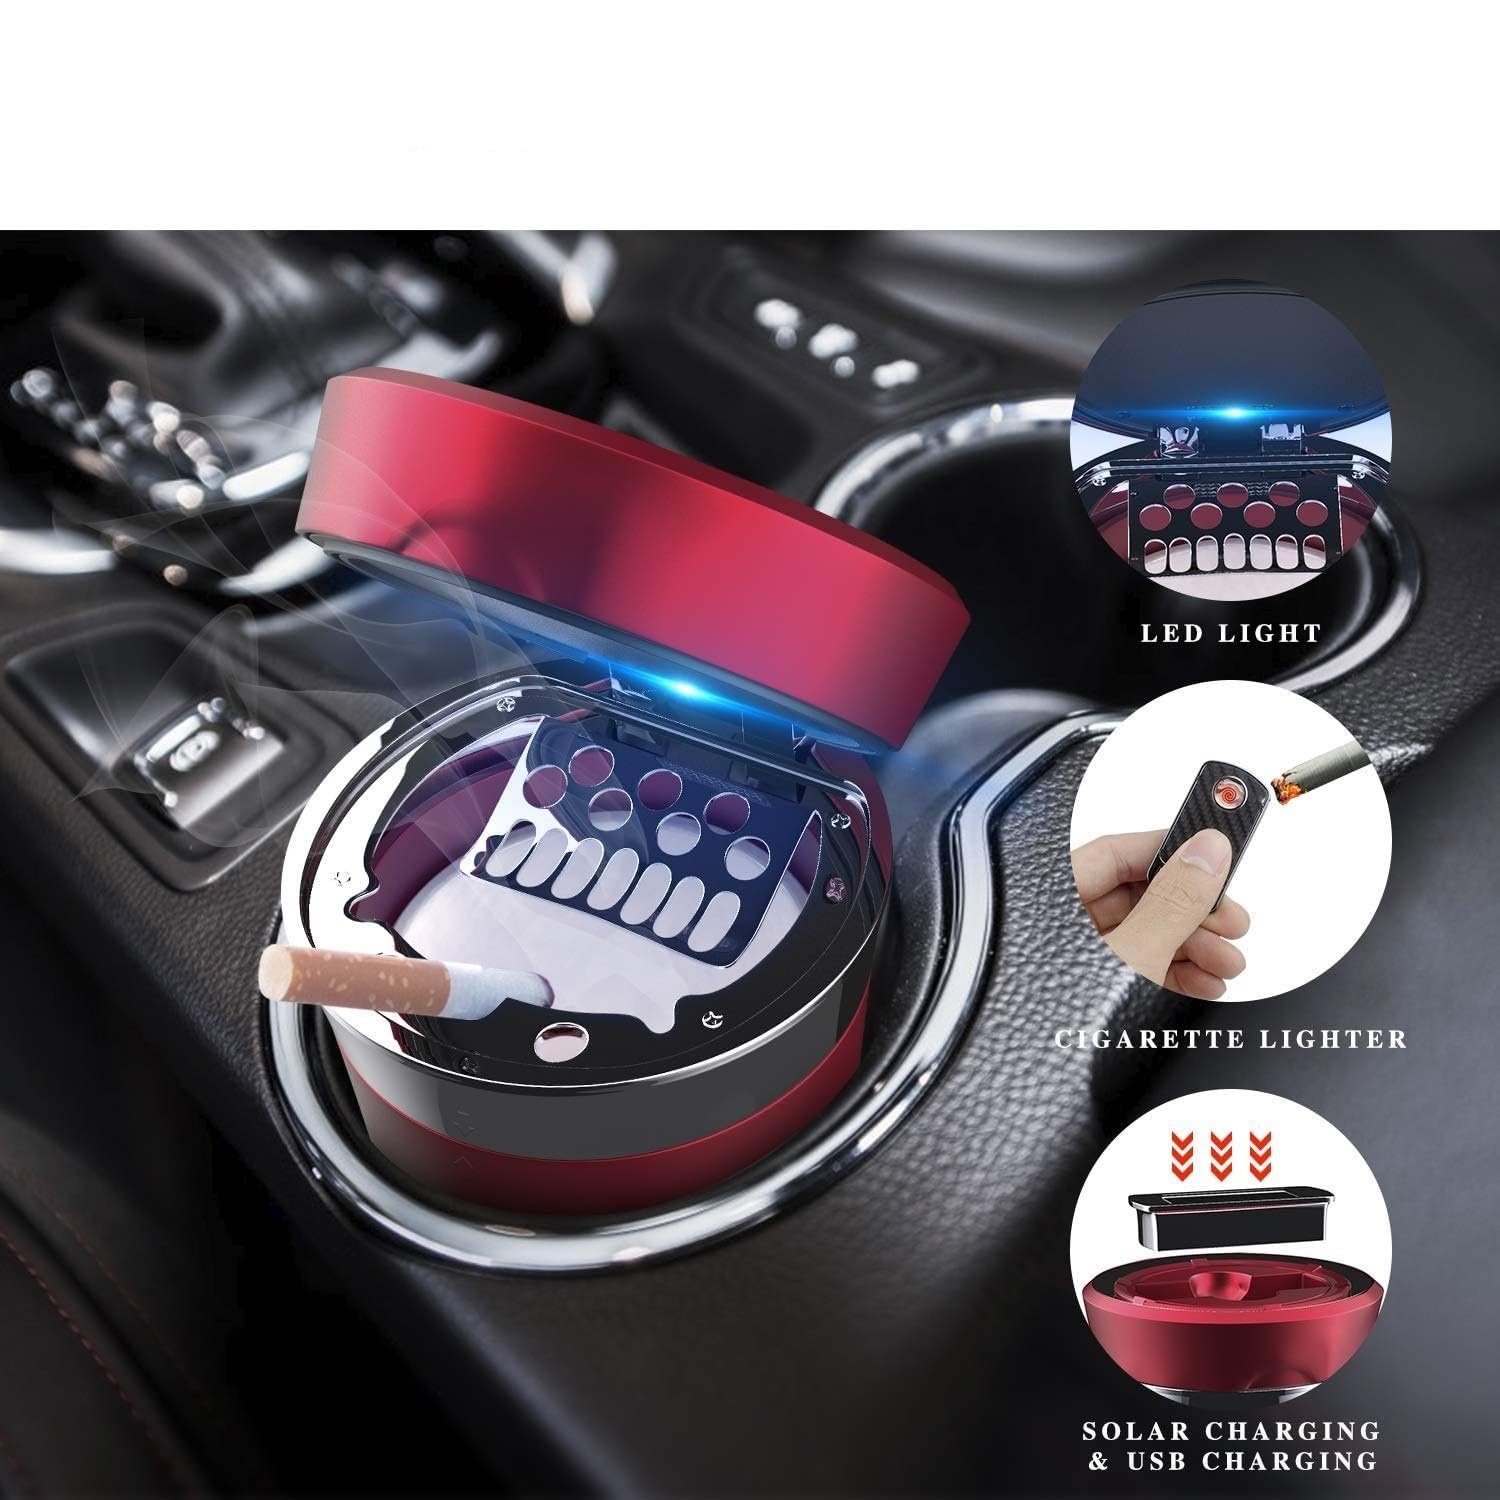 Car Ashtray Electronic Cigarette Lighter Detachable Solar Powered/USB Rechargeable with Lid Blue LED Light For Most Car Cup Holder (Red) Image 